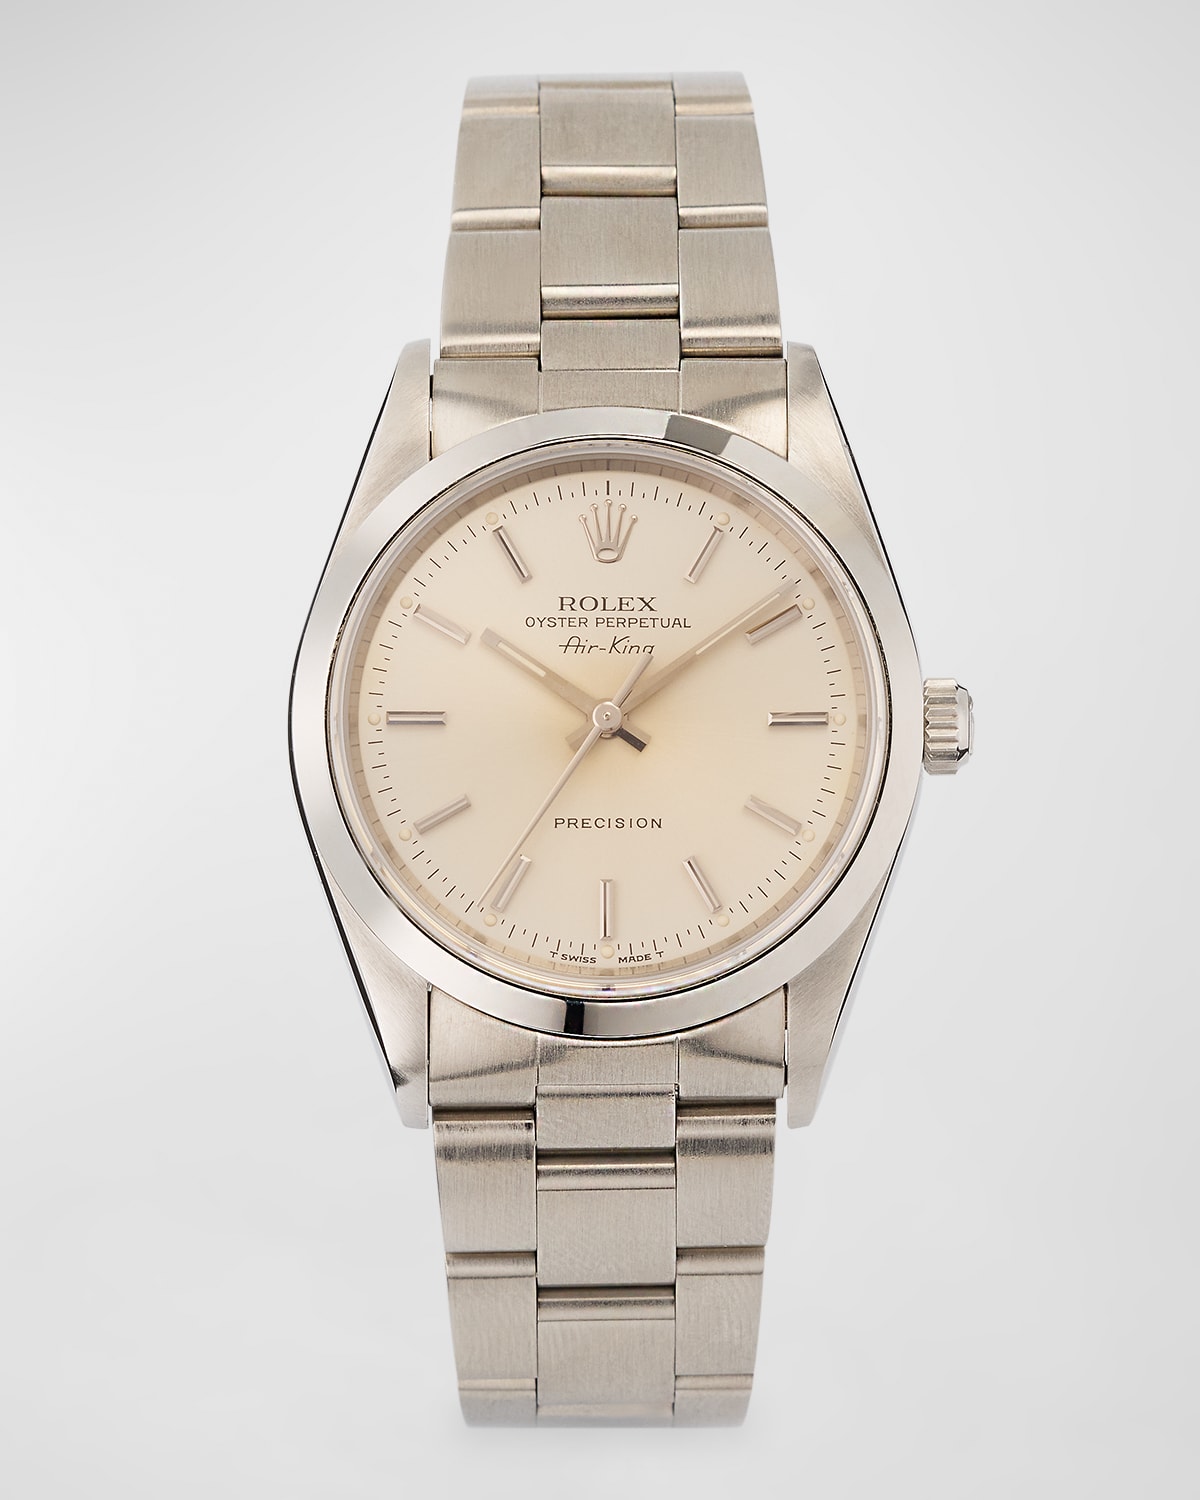 Vintage Watches Rolex Oyster Perpetual Precision 35mm Vintage 1996 Watch In Metallic